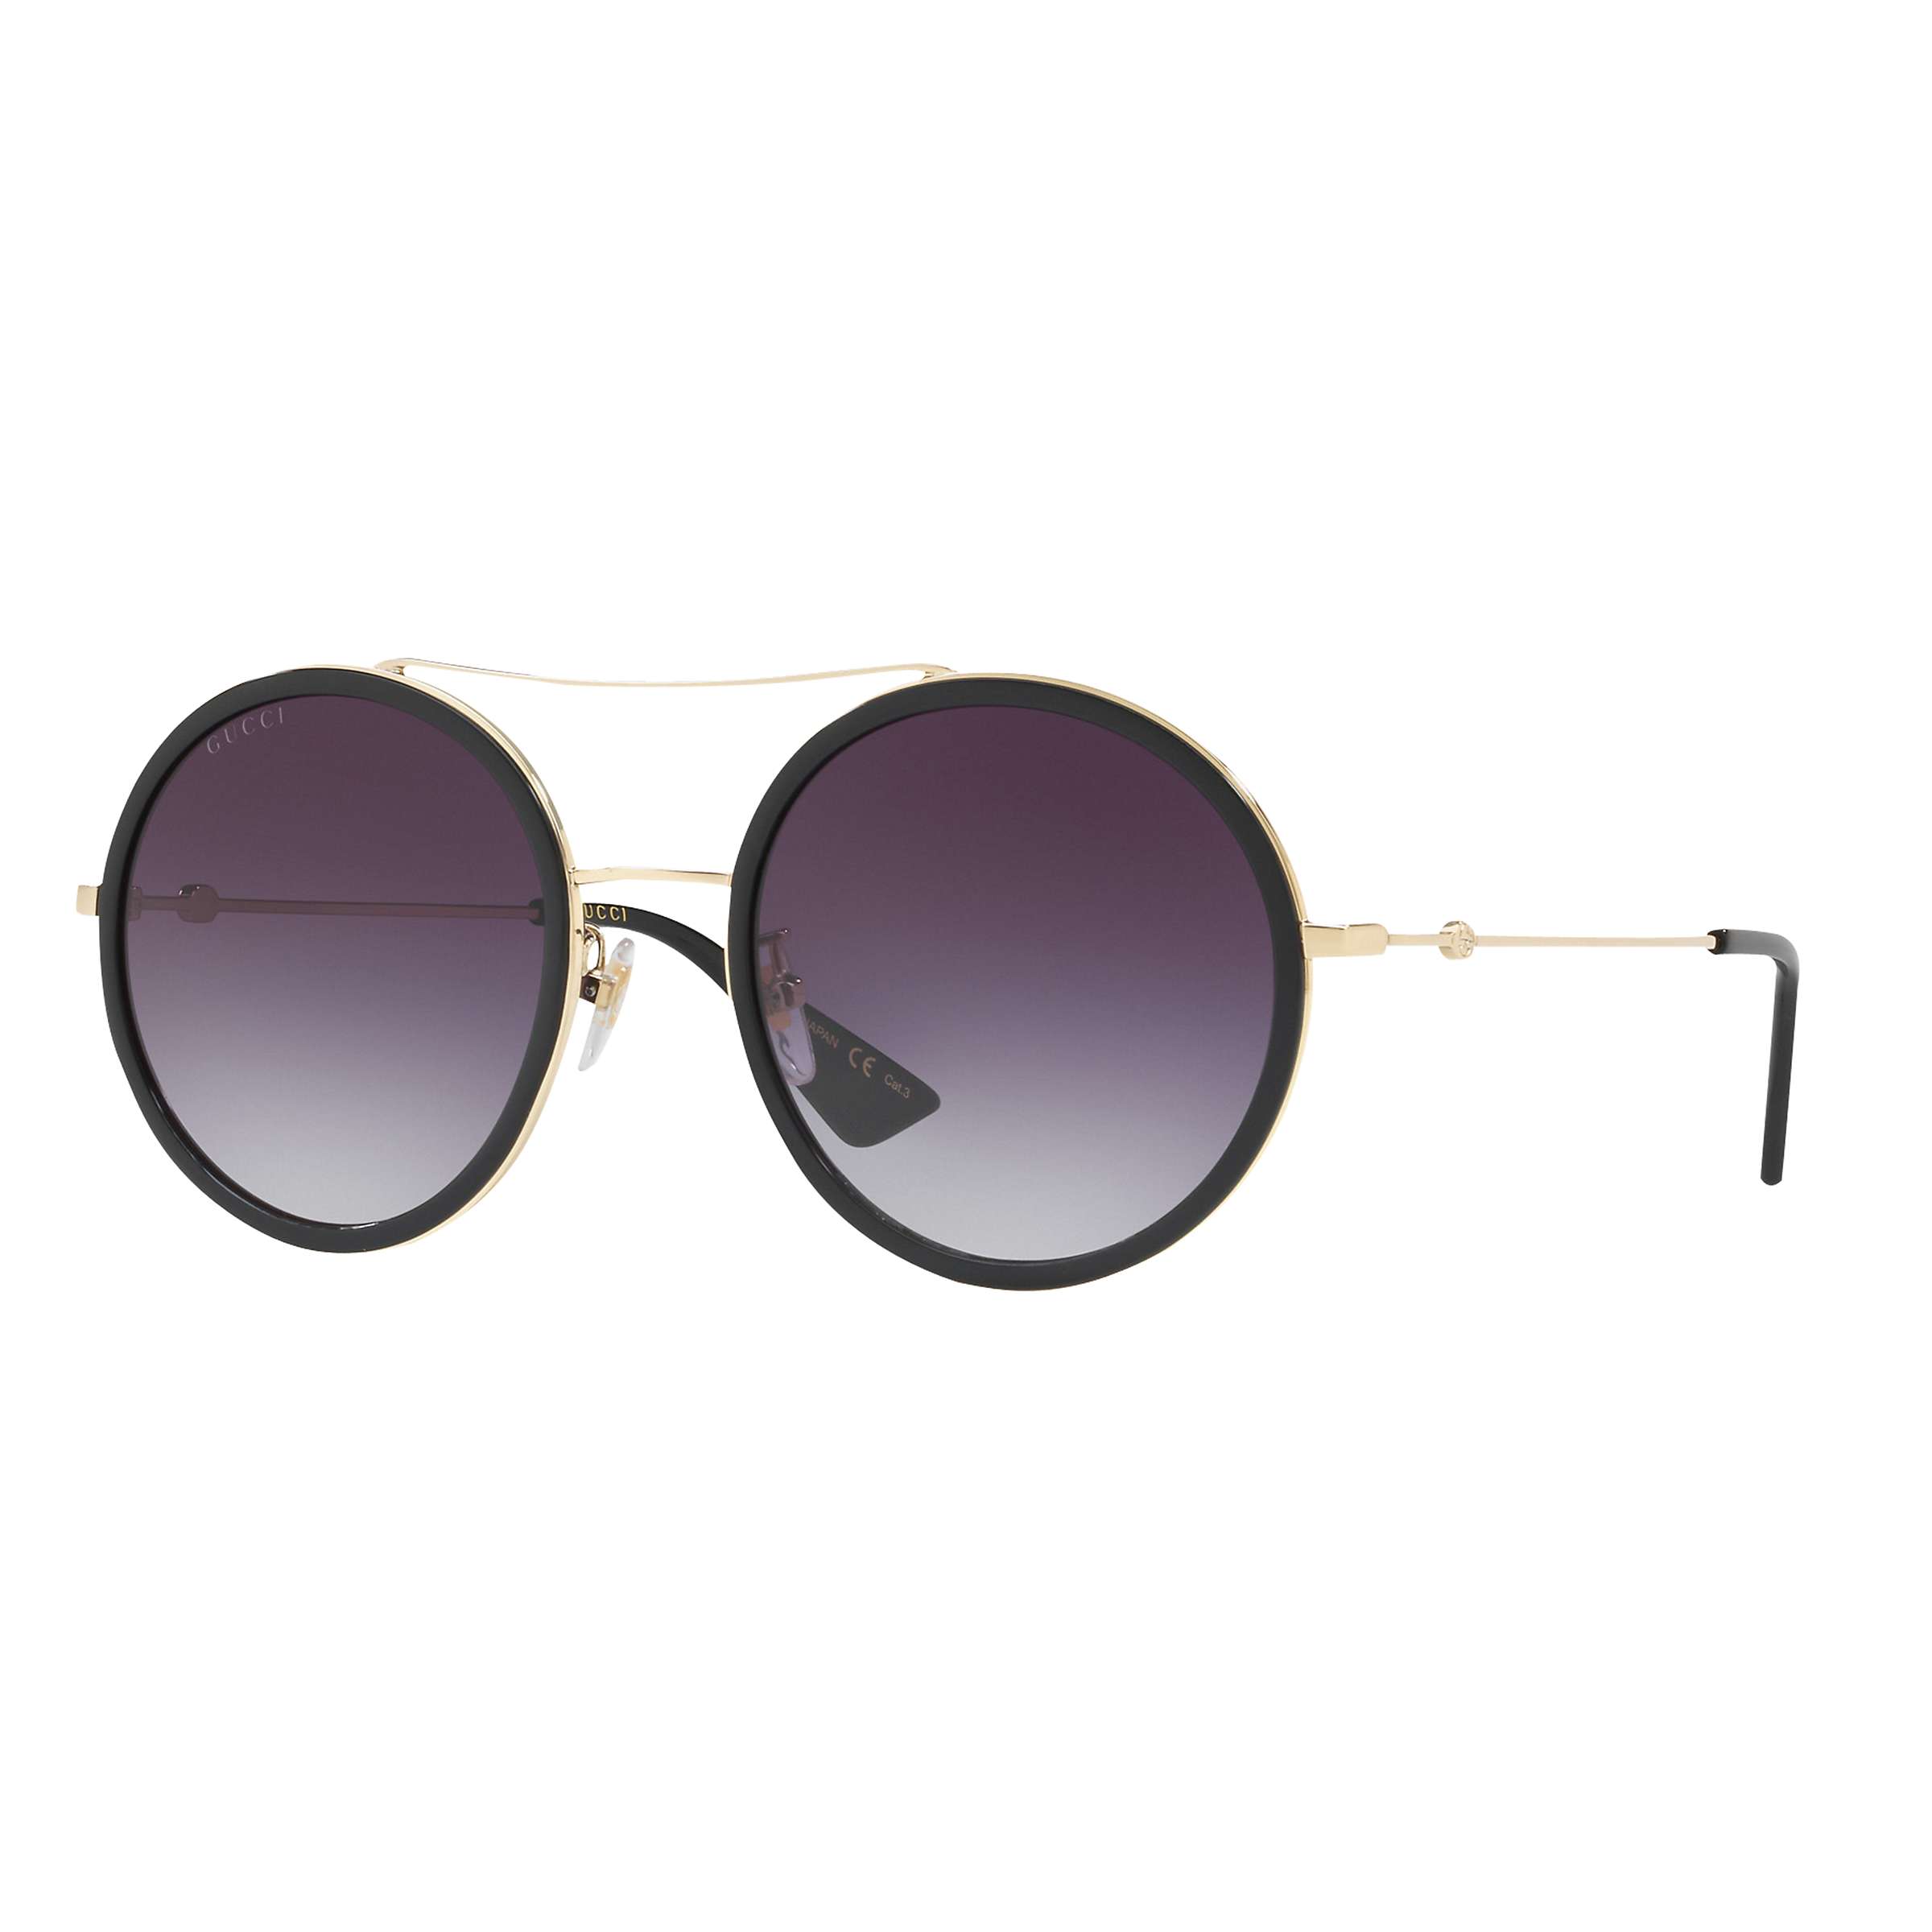 Buy Gucci GG0016S Round Sunglasses Online at johnlewis.com